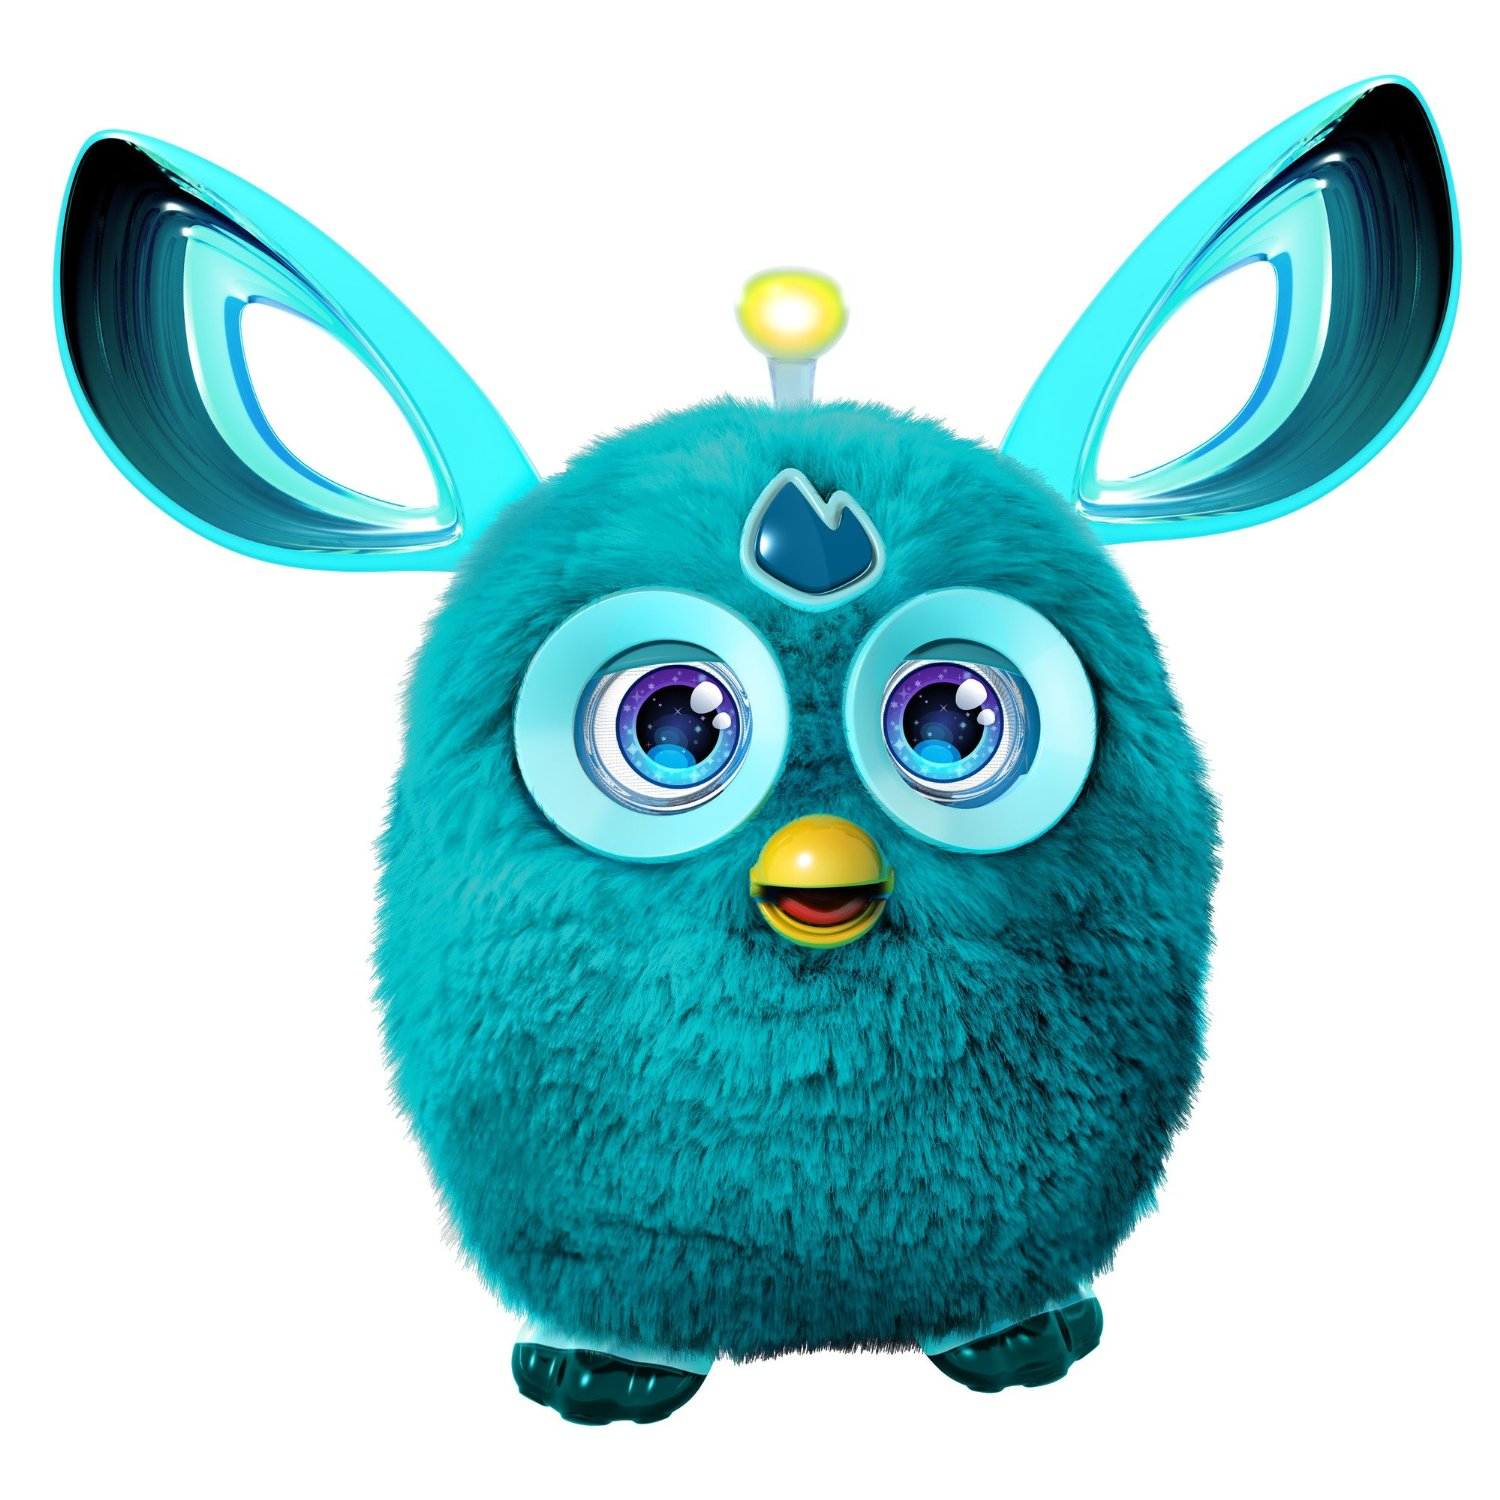 Get a Furby Connect (Teal) for $89.99!